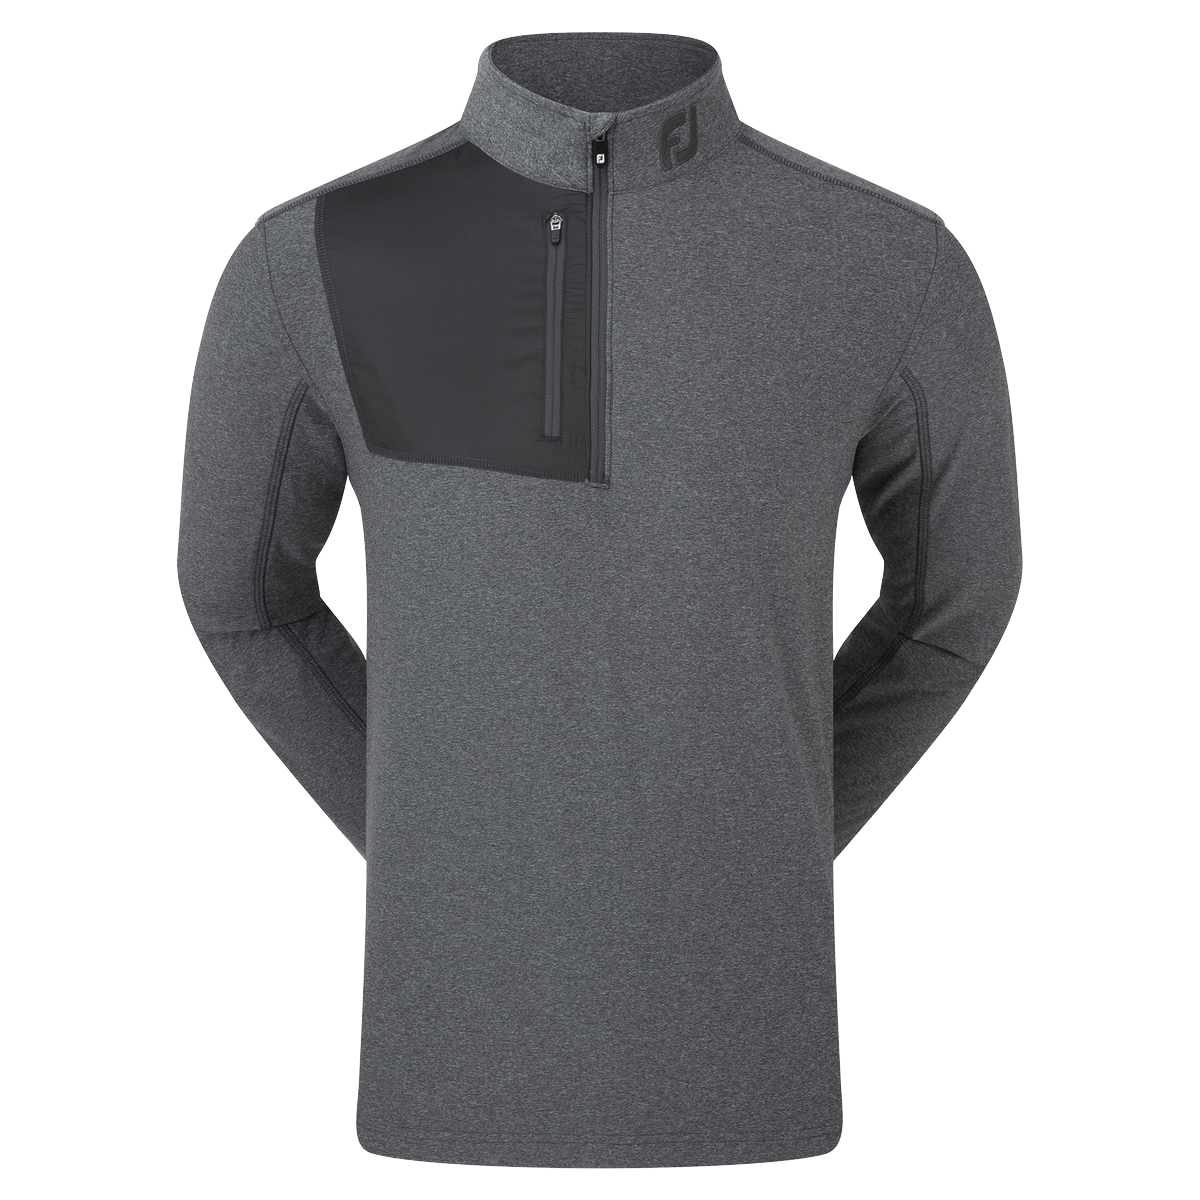 FootJoy Mens Heather Chill-Out XP Golf Mid-Layer Pullover  - Heather Charcoal